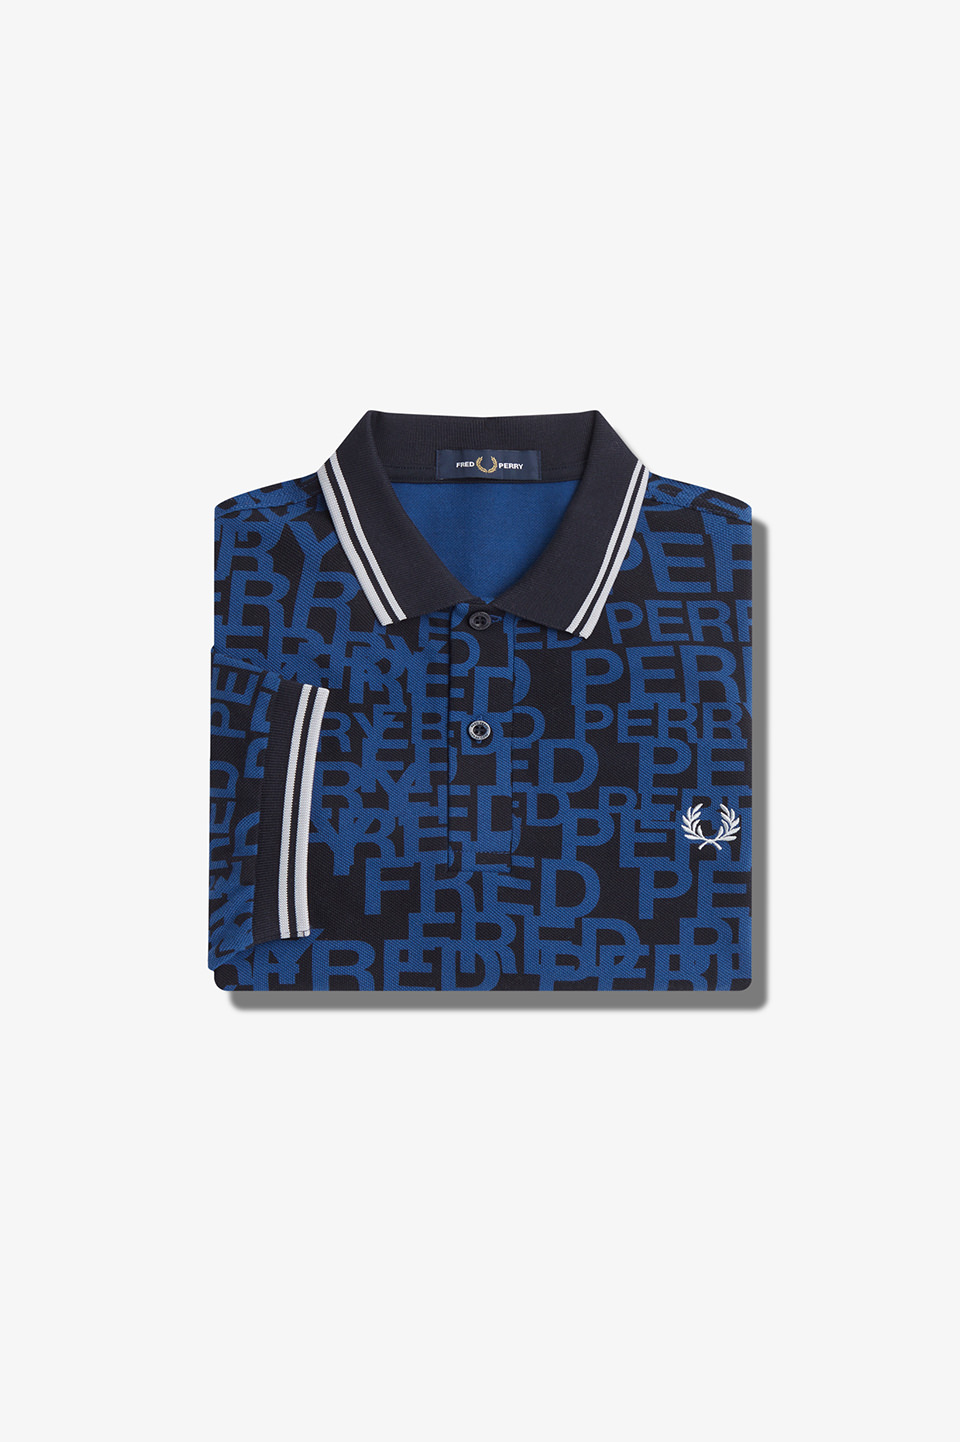 Graphic Text Fred Perry Shirt(M R31：SHADED COBALT BLUE): | FRED